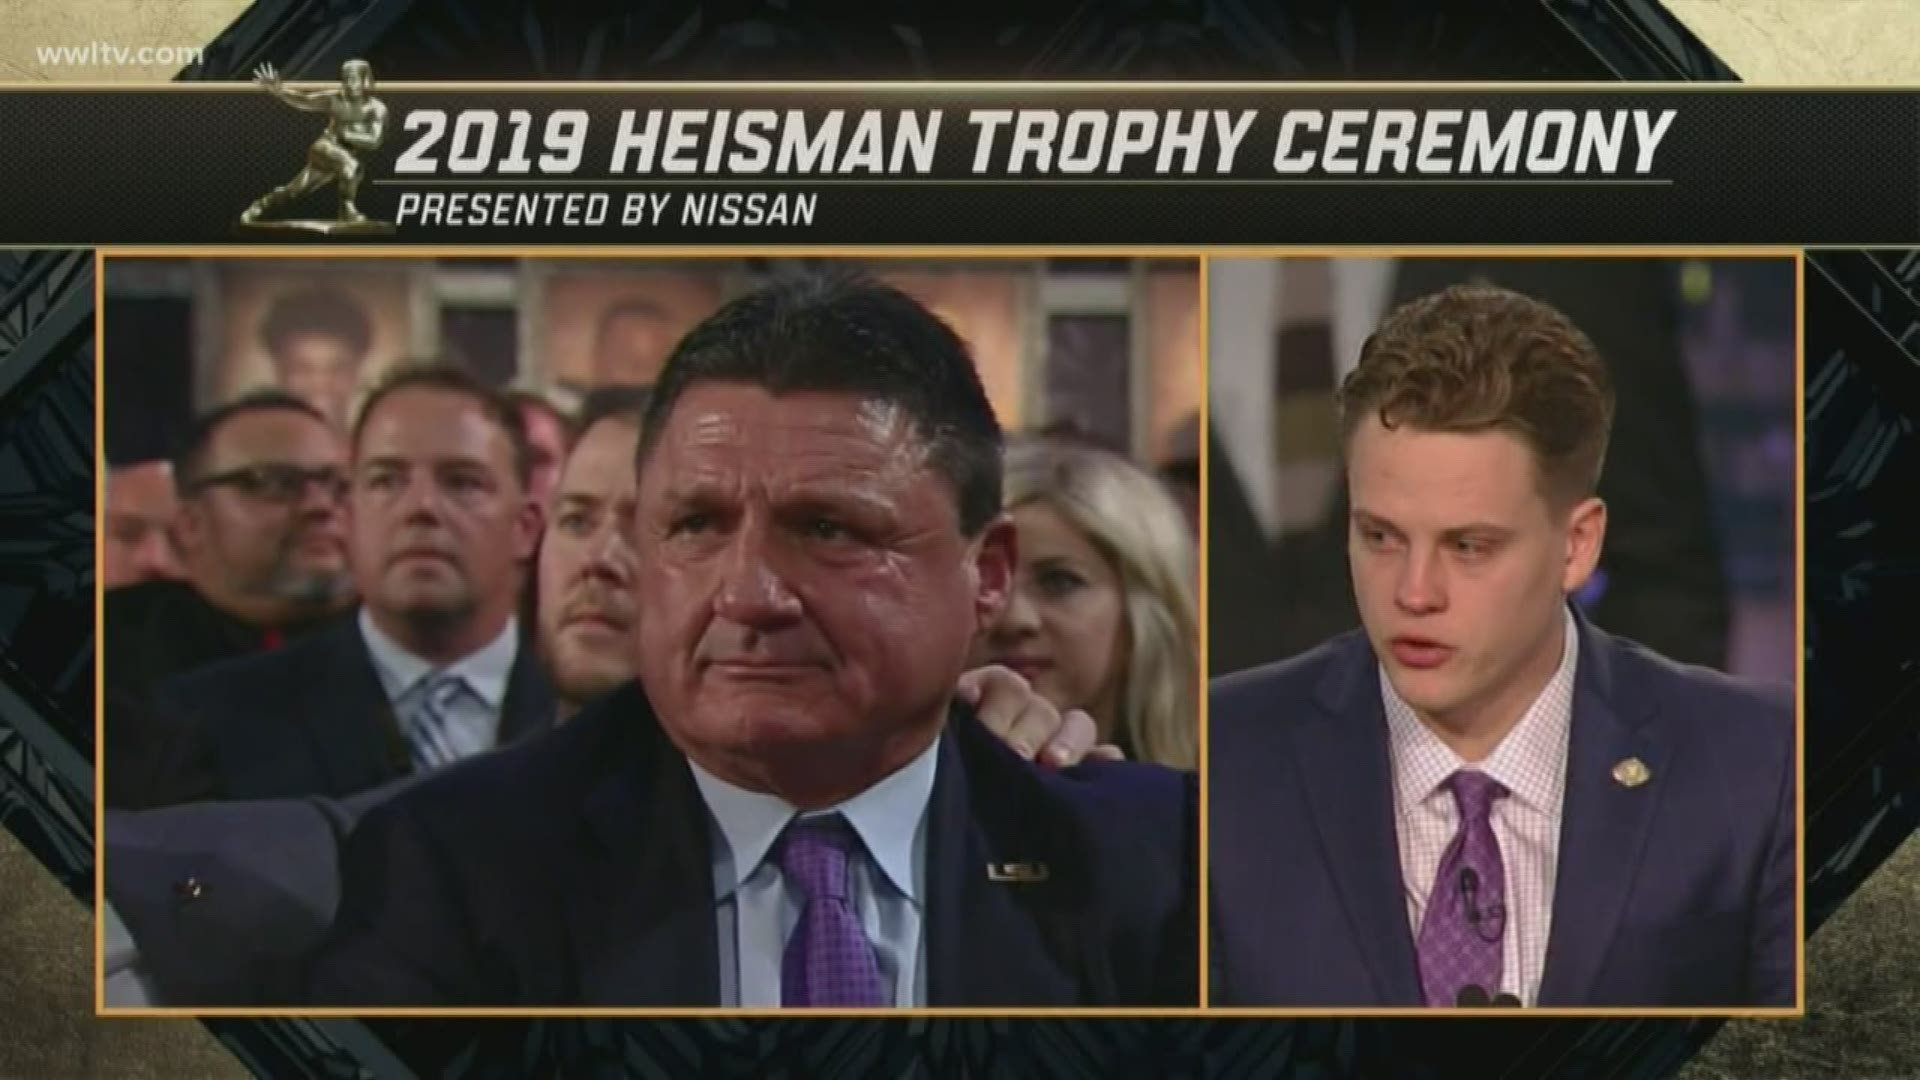 For the first time since Billy Cannon Sr. took home Louisiana's inaugural Heisman Trophy in 1959, LSU's Joe Burrow has won college football's highest honor.